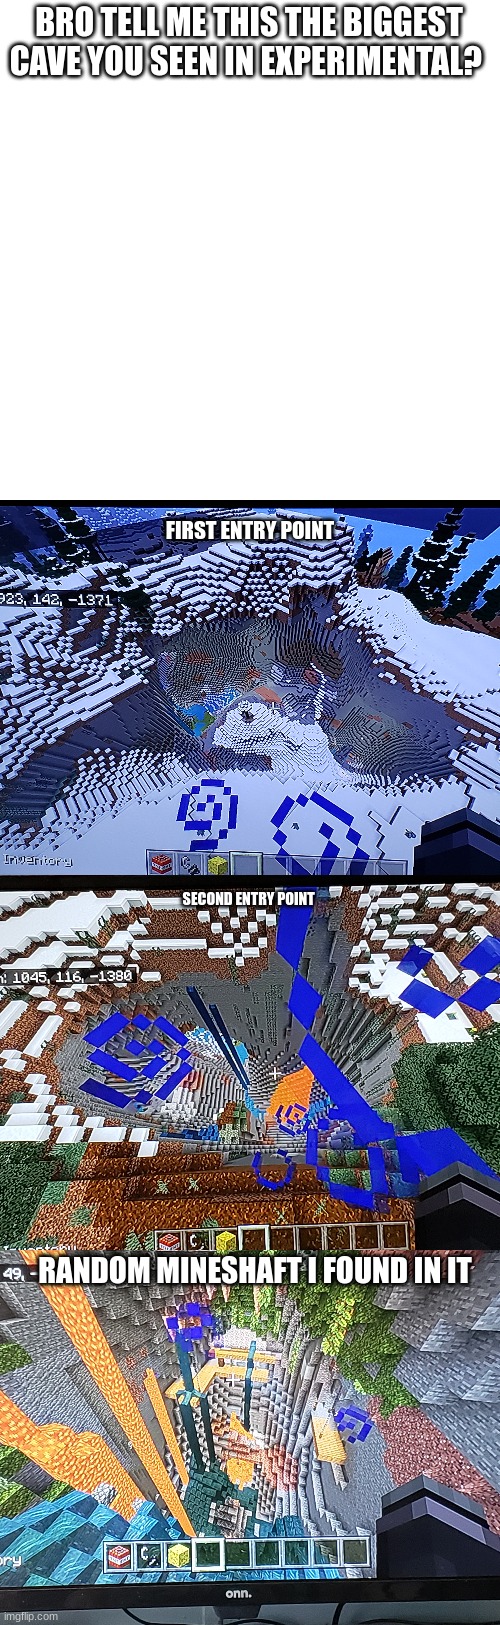 new caves=huge | BRO TELL ME THIS THE BIGGEST CAVE YOU SEEN IN EXPERIMENTAL? FIRST ENTRY POINT; SECOND ENTRY POINT; RANDOM MINESHAFT I FOUND IN IT | image tagged in memes,blank transparent square | made w/ Imgflip meme maker